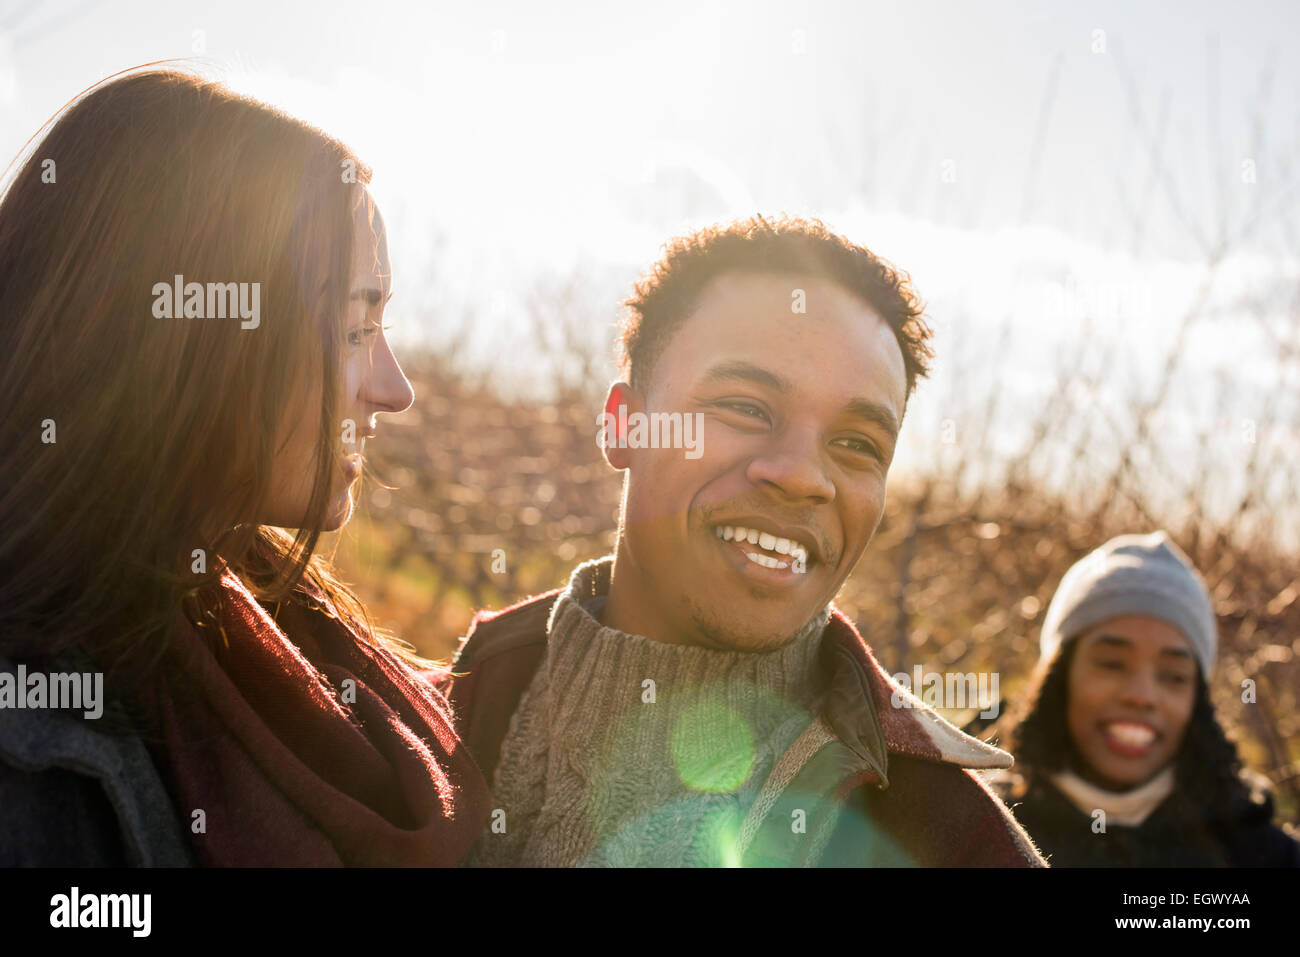 A group of three friends outdoors on a winter walk. Stock Photo